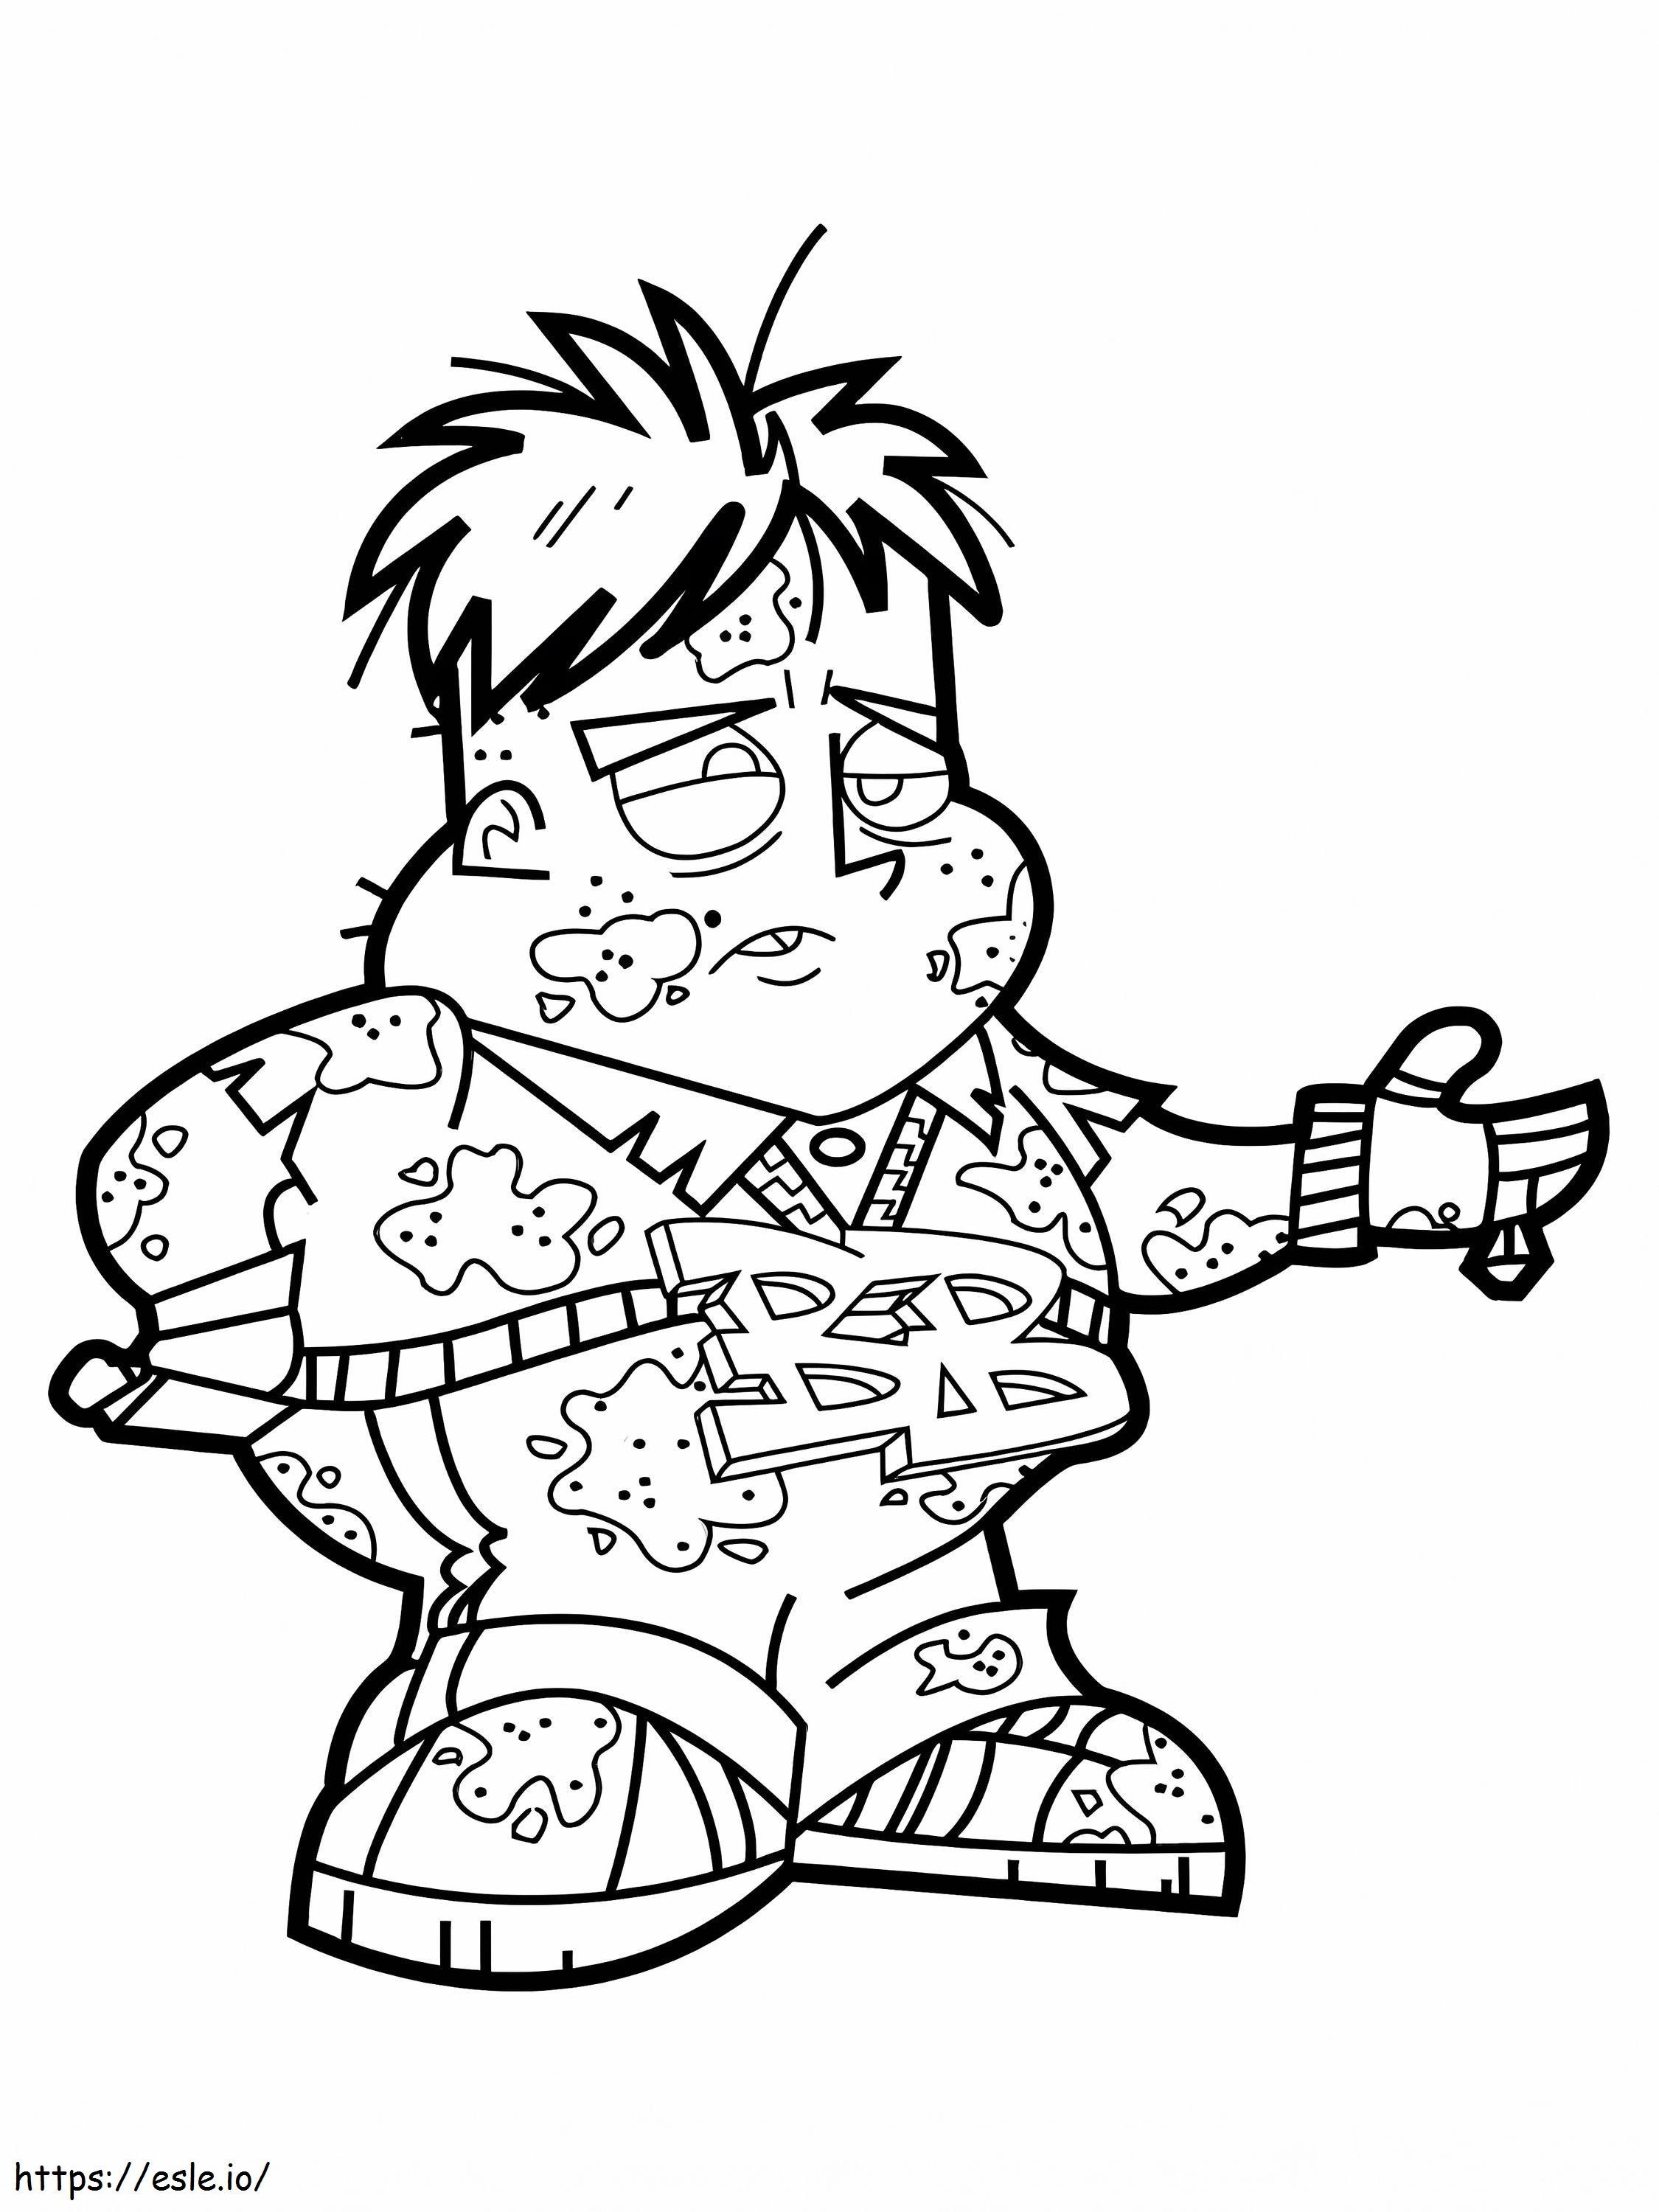 Bling Bling Boy coloring page